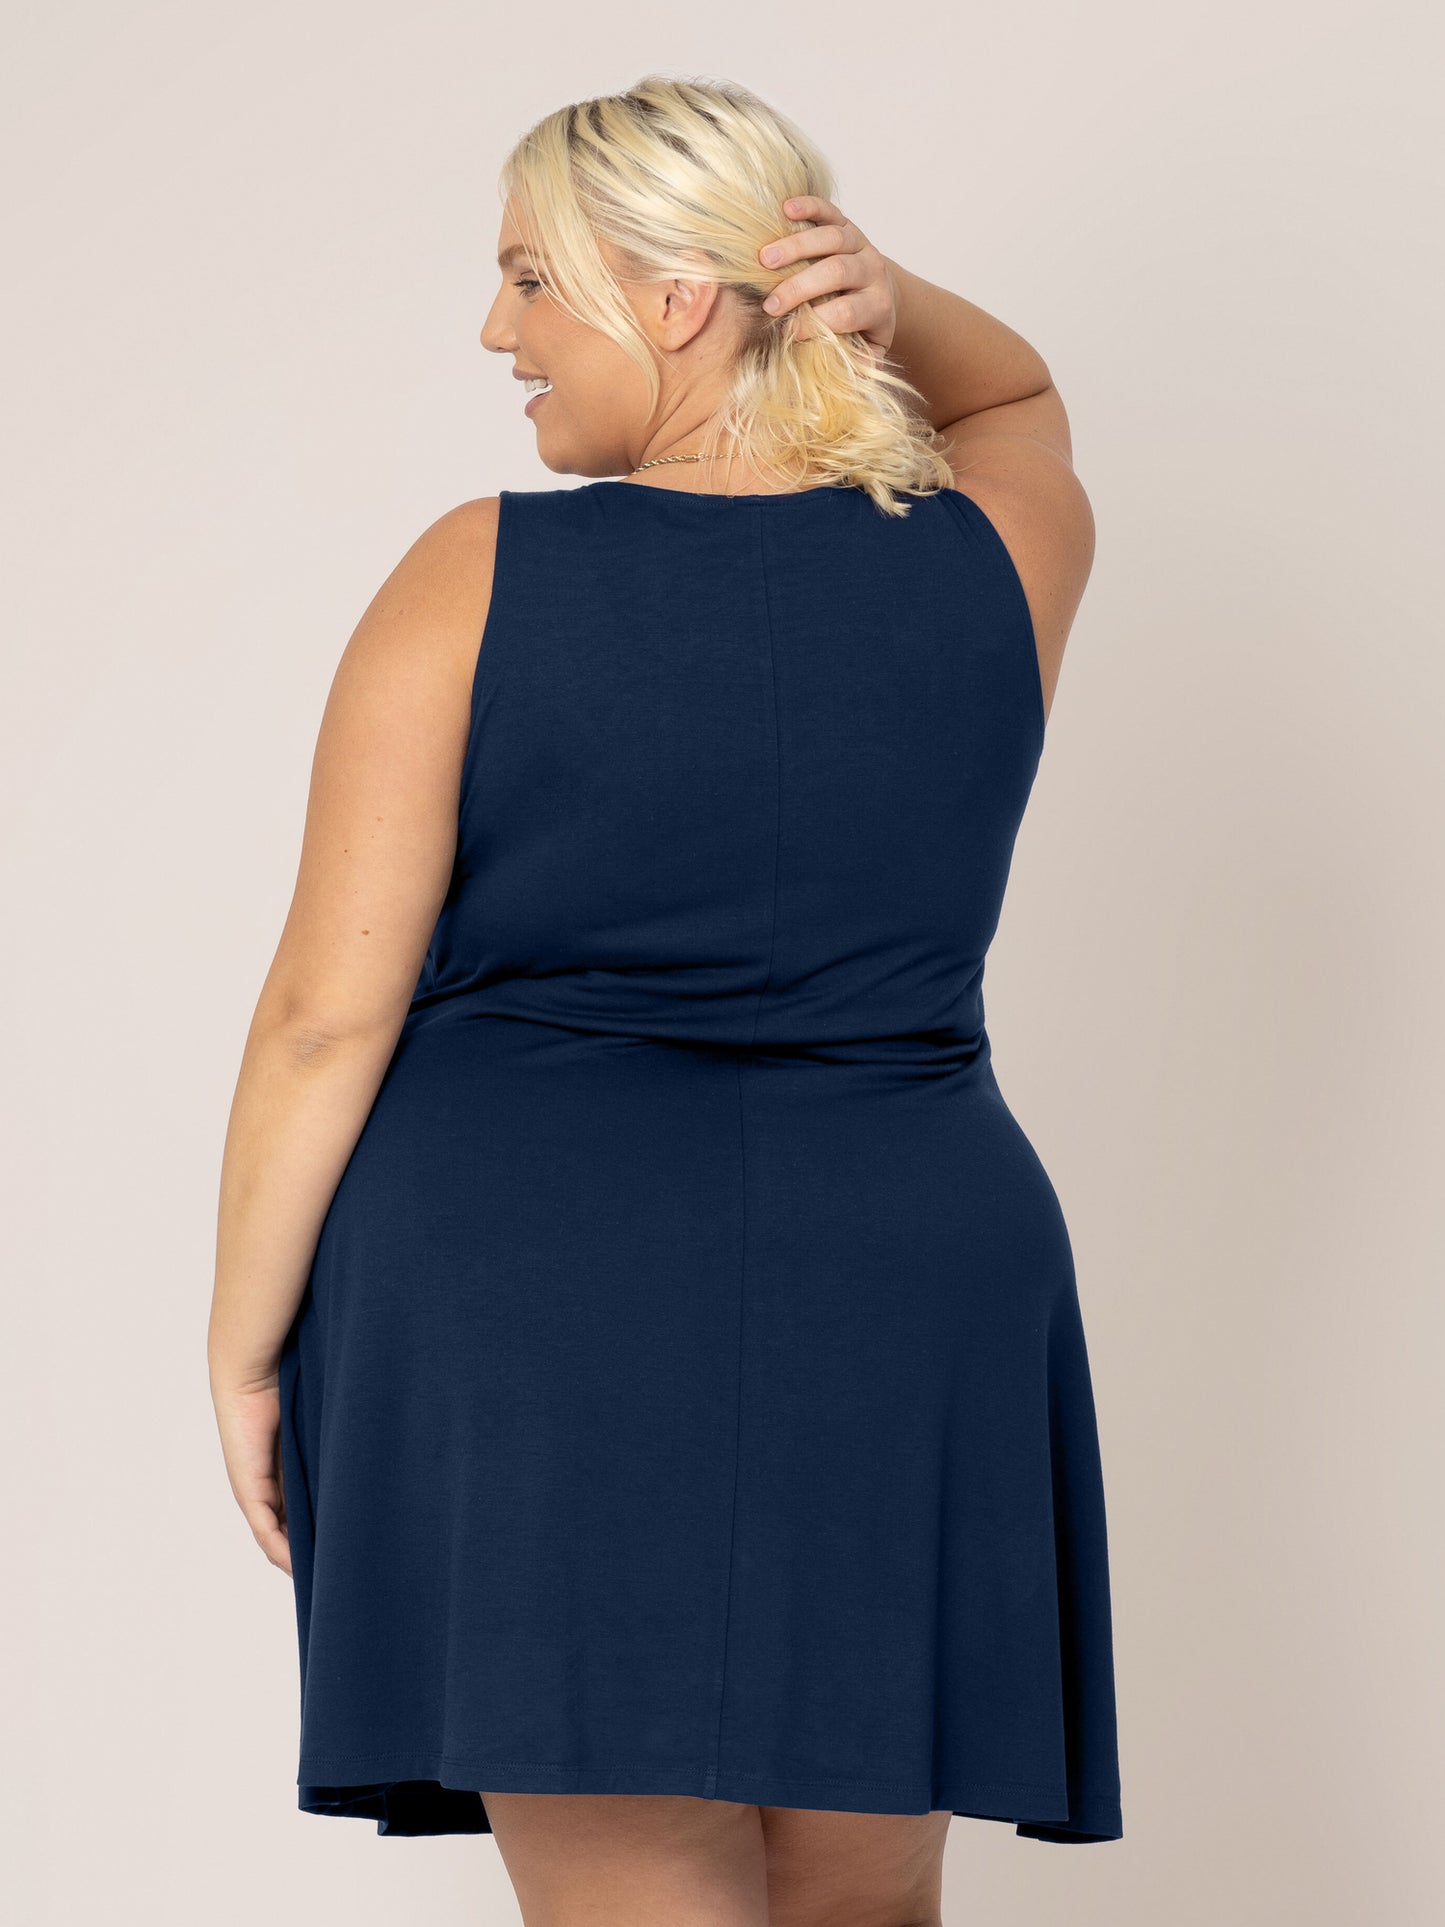 Back view of model pulling hair aside wearing the Penelope Crossover Nursing Dress in navy